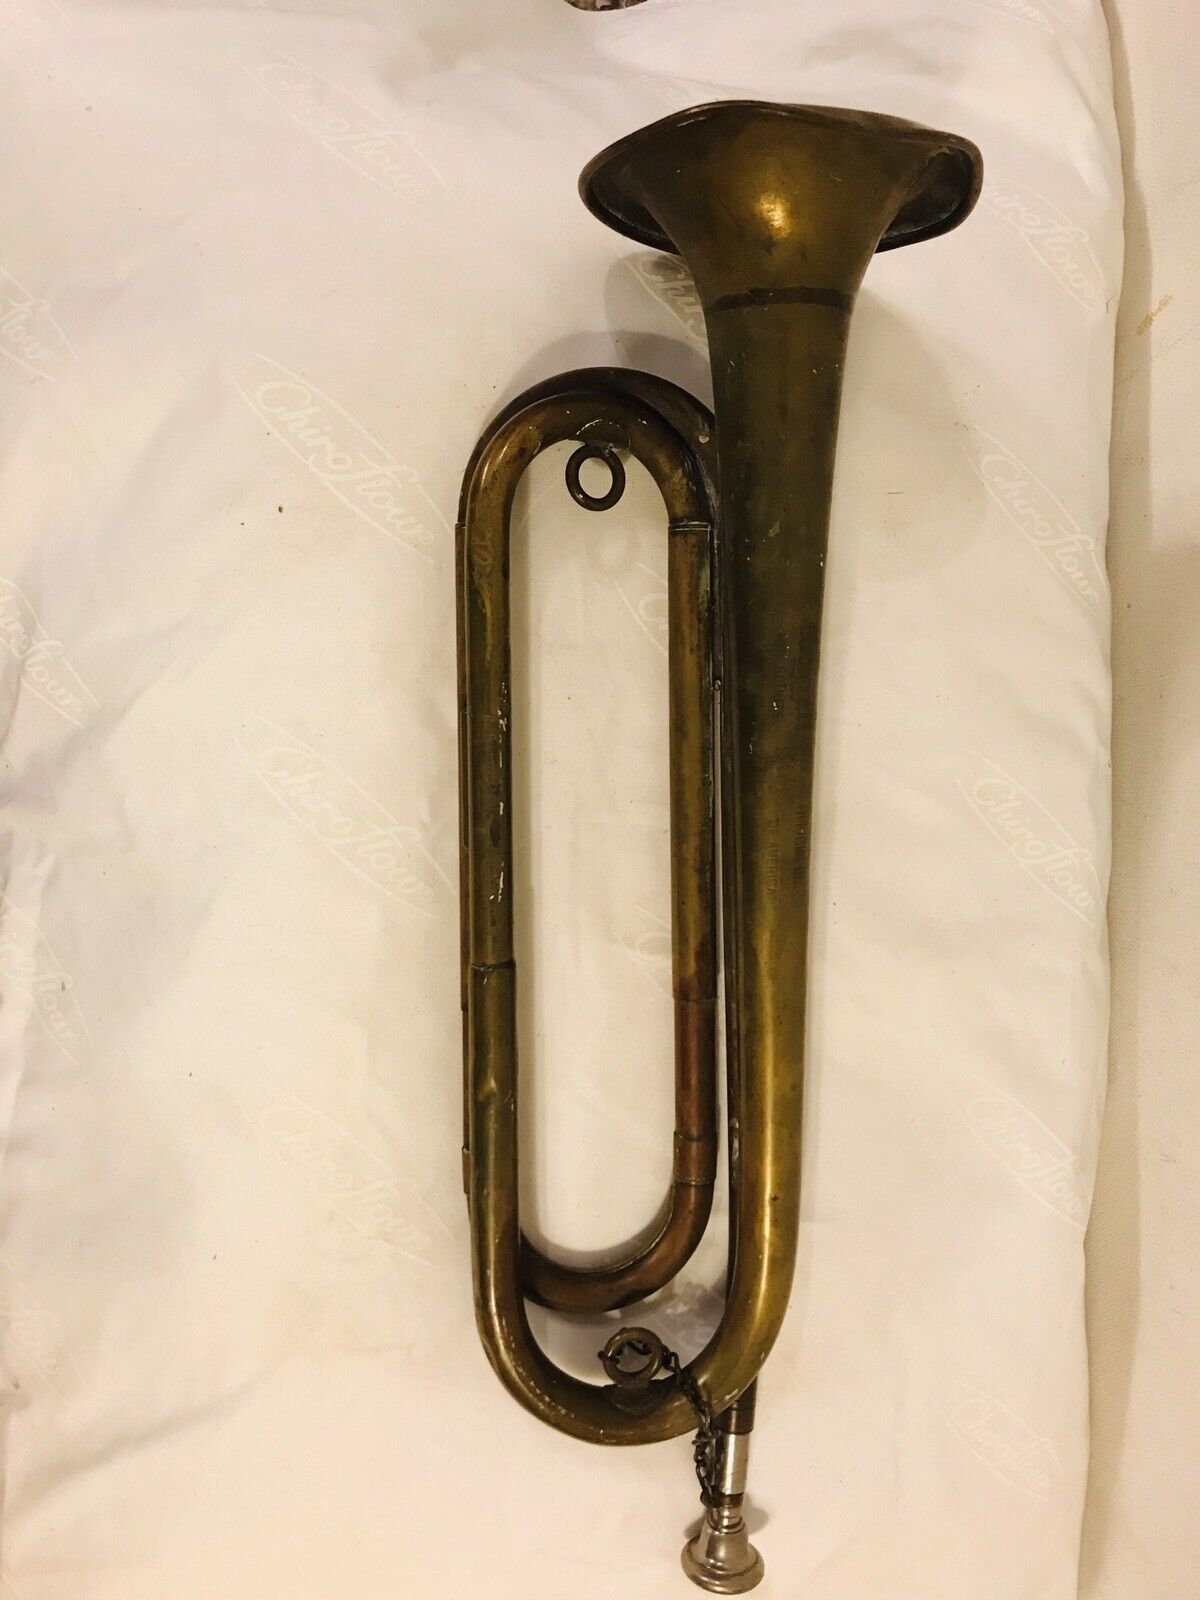 Bugle Cavalry Vintage Brass Unmarked & Untested See12pics4size/detail.make Offer